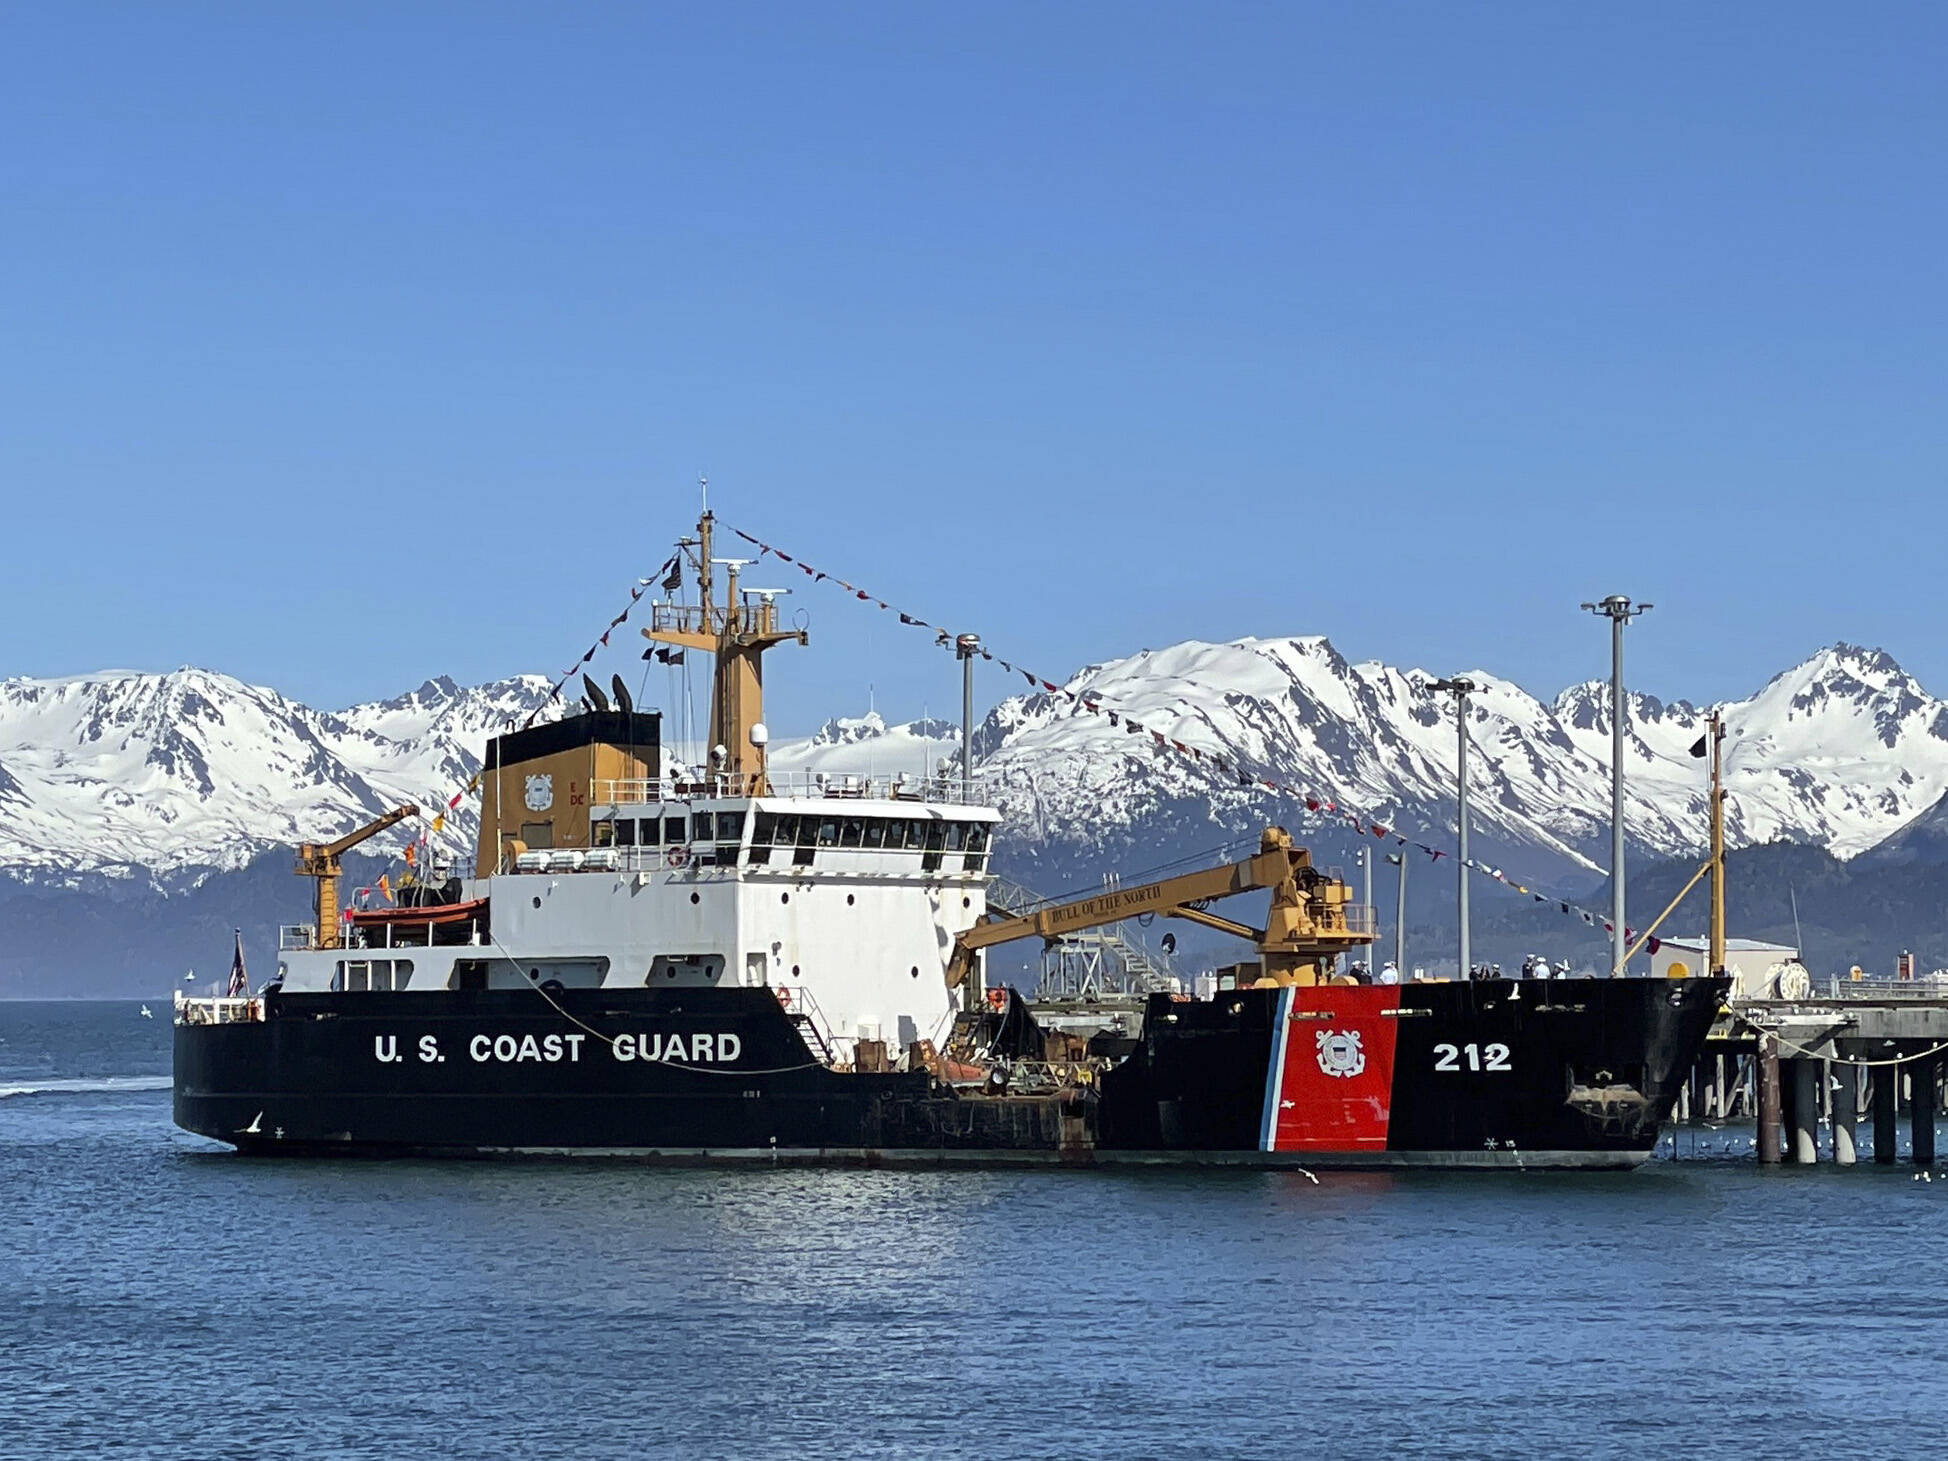 Having made its maiden voyage to Homer in 2003, the USCGC Hickory left Homer on Friday, May 20, 2022, on its way to Baltimore, Maryland, where it will be refurbished before heading to Guam. In December, the USCGC Aspen will arrive in Homer to take the Hickory’s place. (Photo by McKibben Jackinsky)